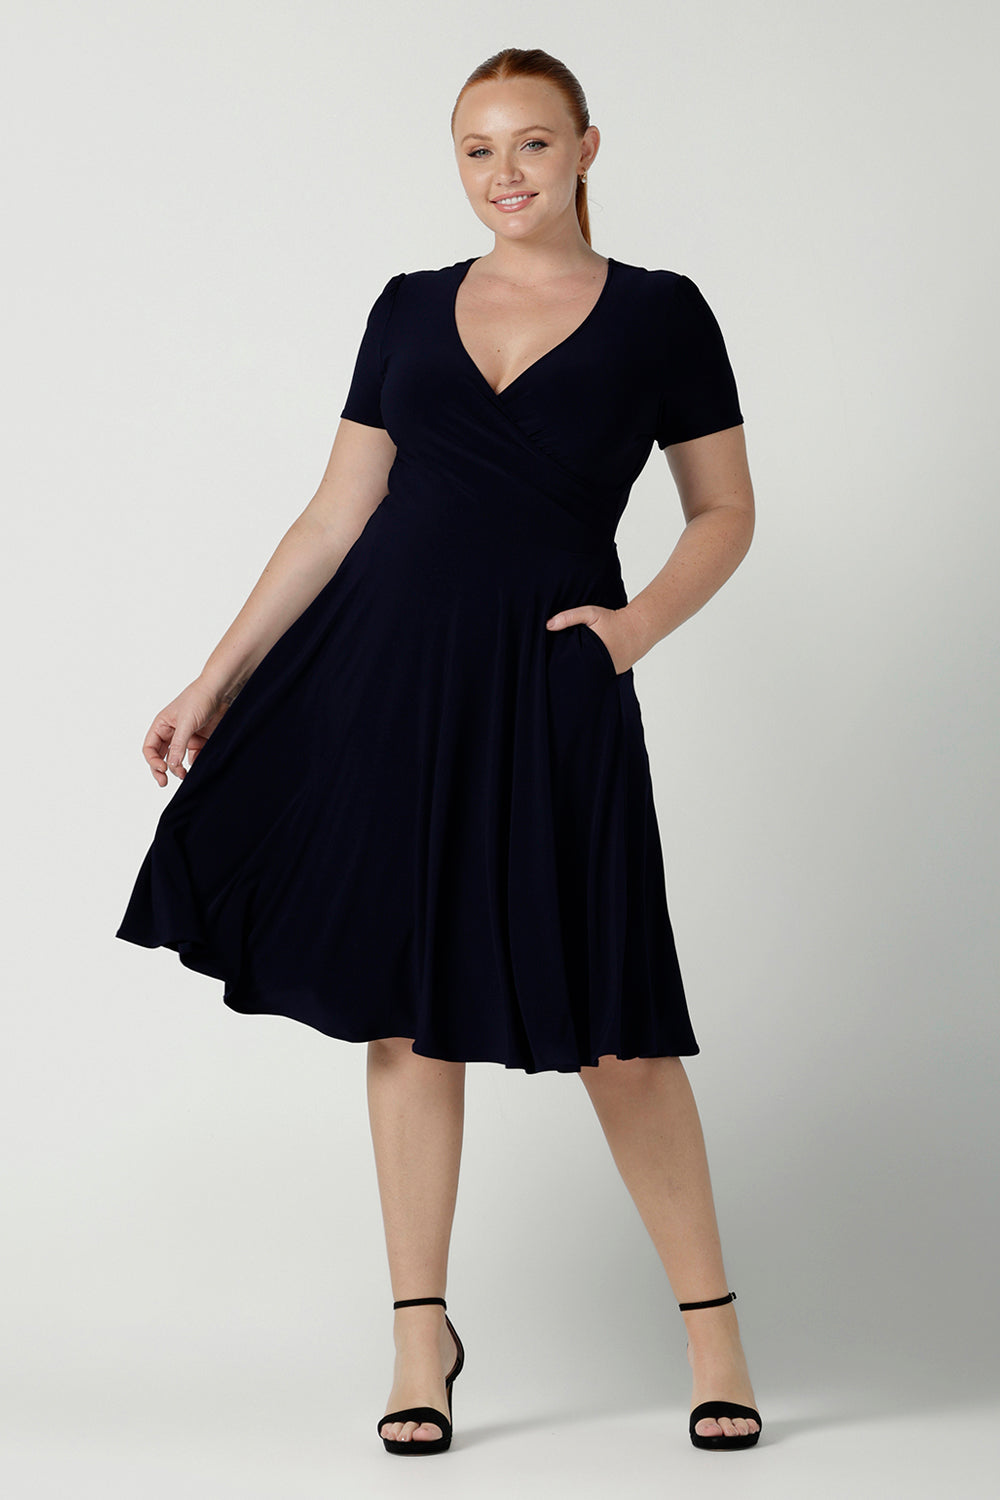 Fixed Wrap Bibi dress in Navy. Curvy size 12 woman wears a jersey dress the perfect corporate comfortable work dress. Below the knee length. Size 8 - 24.